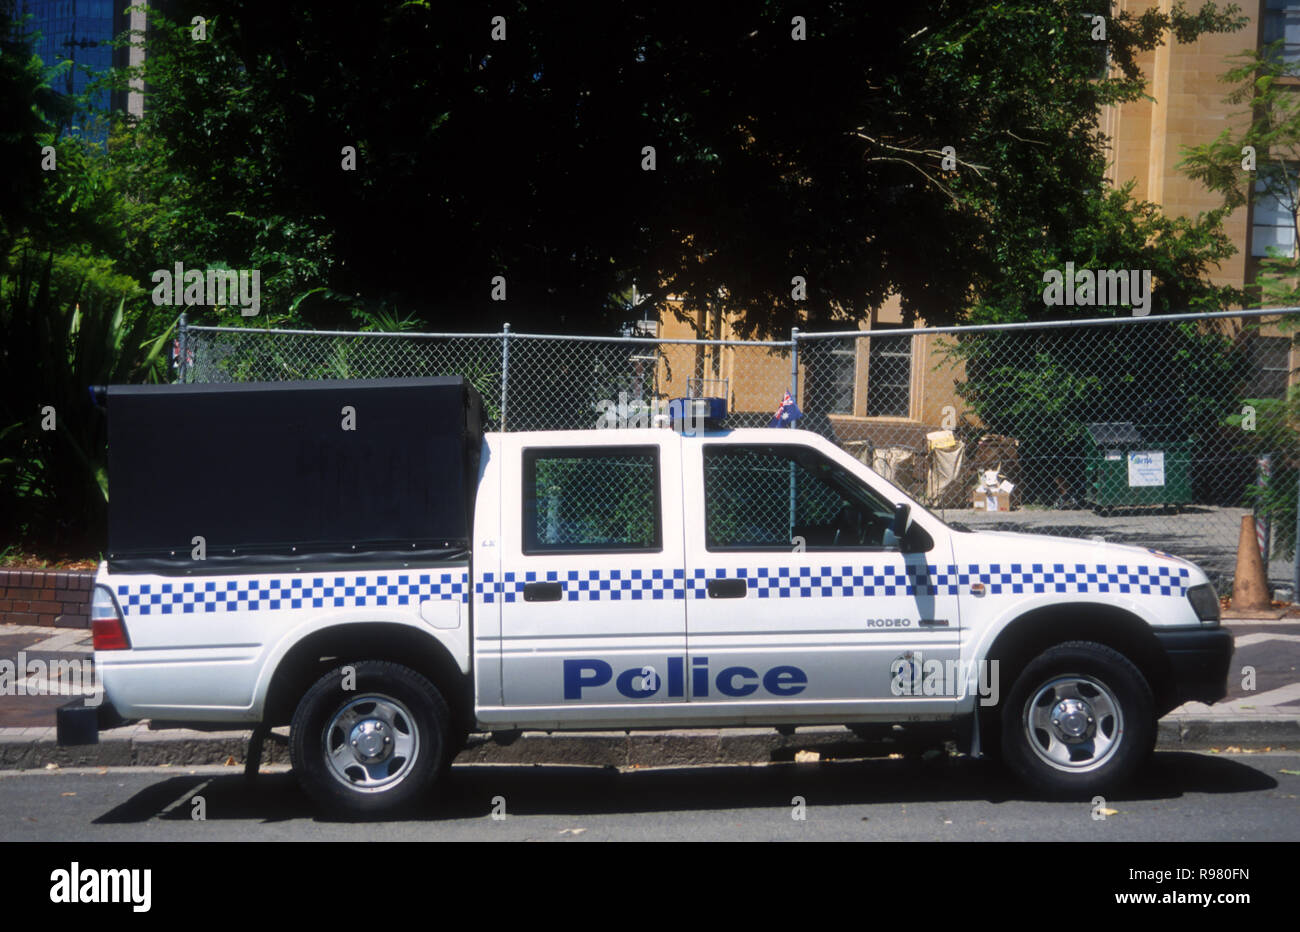 POLICE PATROL WAGON PARKED IN AN INNER CITY STREET, SYDNEY, NEW SOUTH WALES, AUSTRALIA Stock Photo